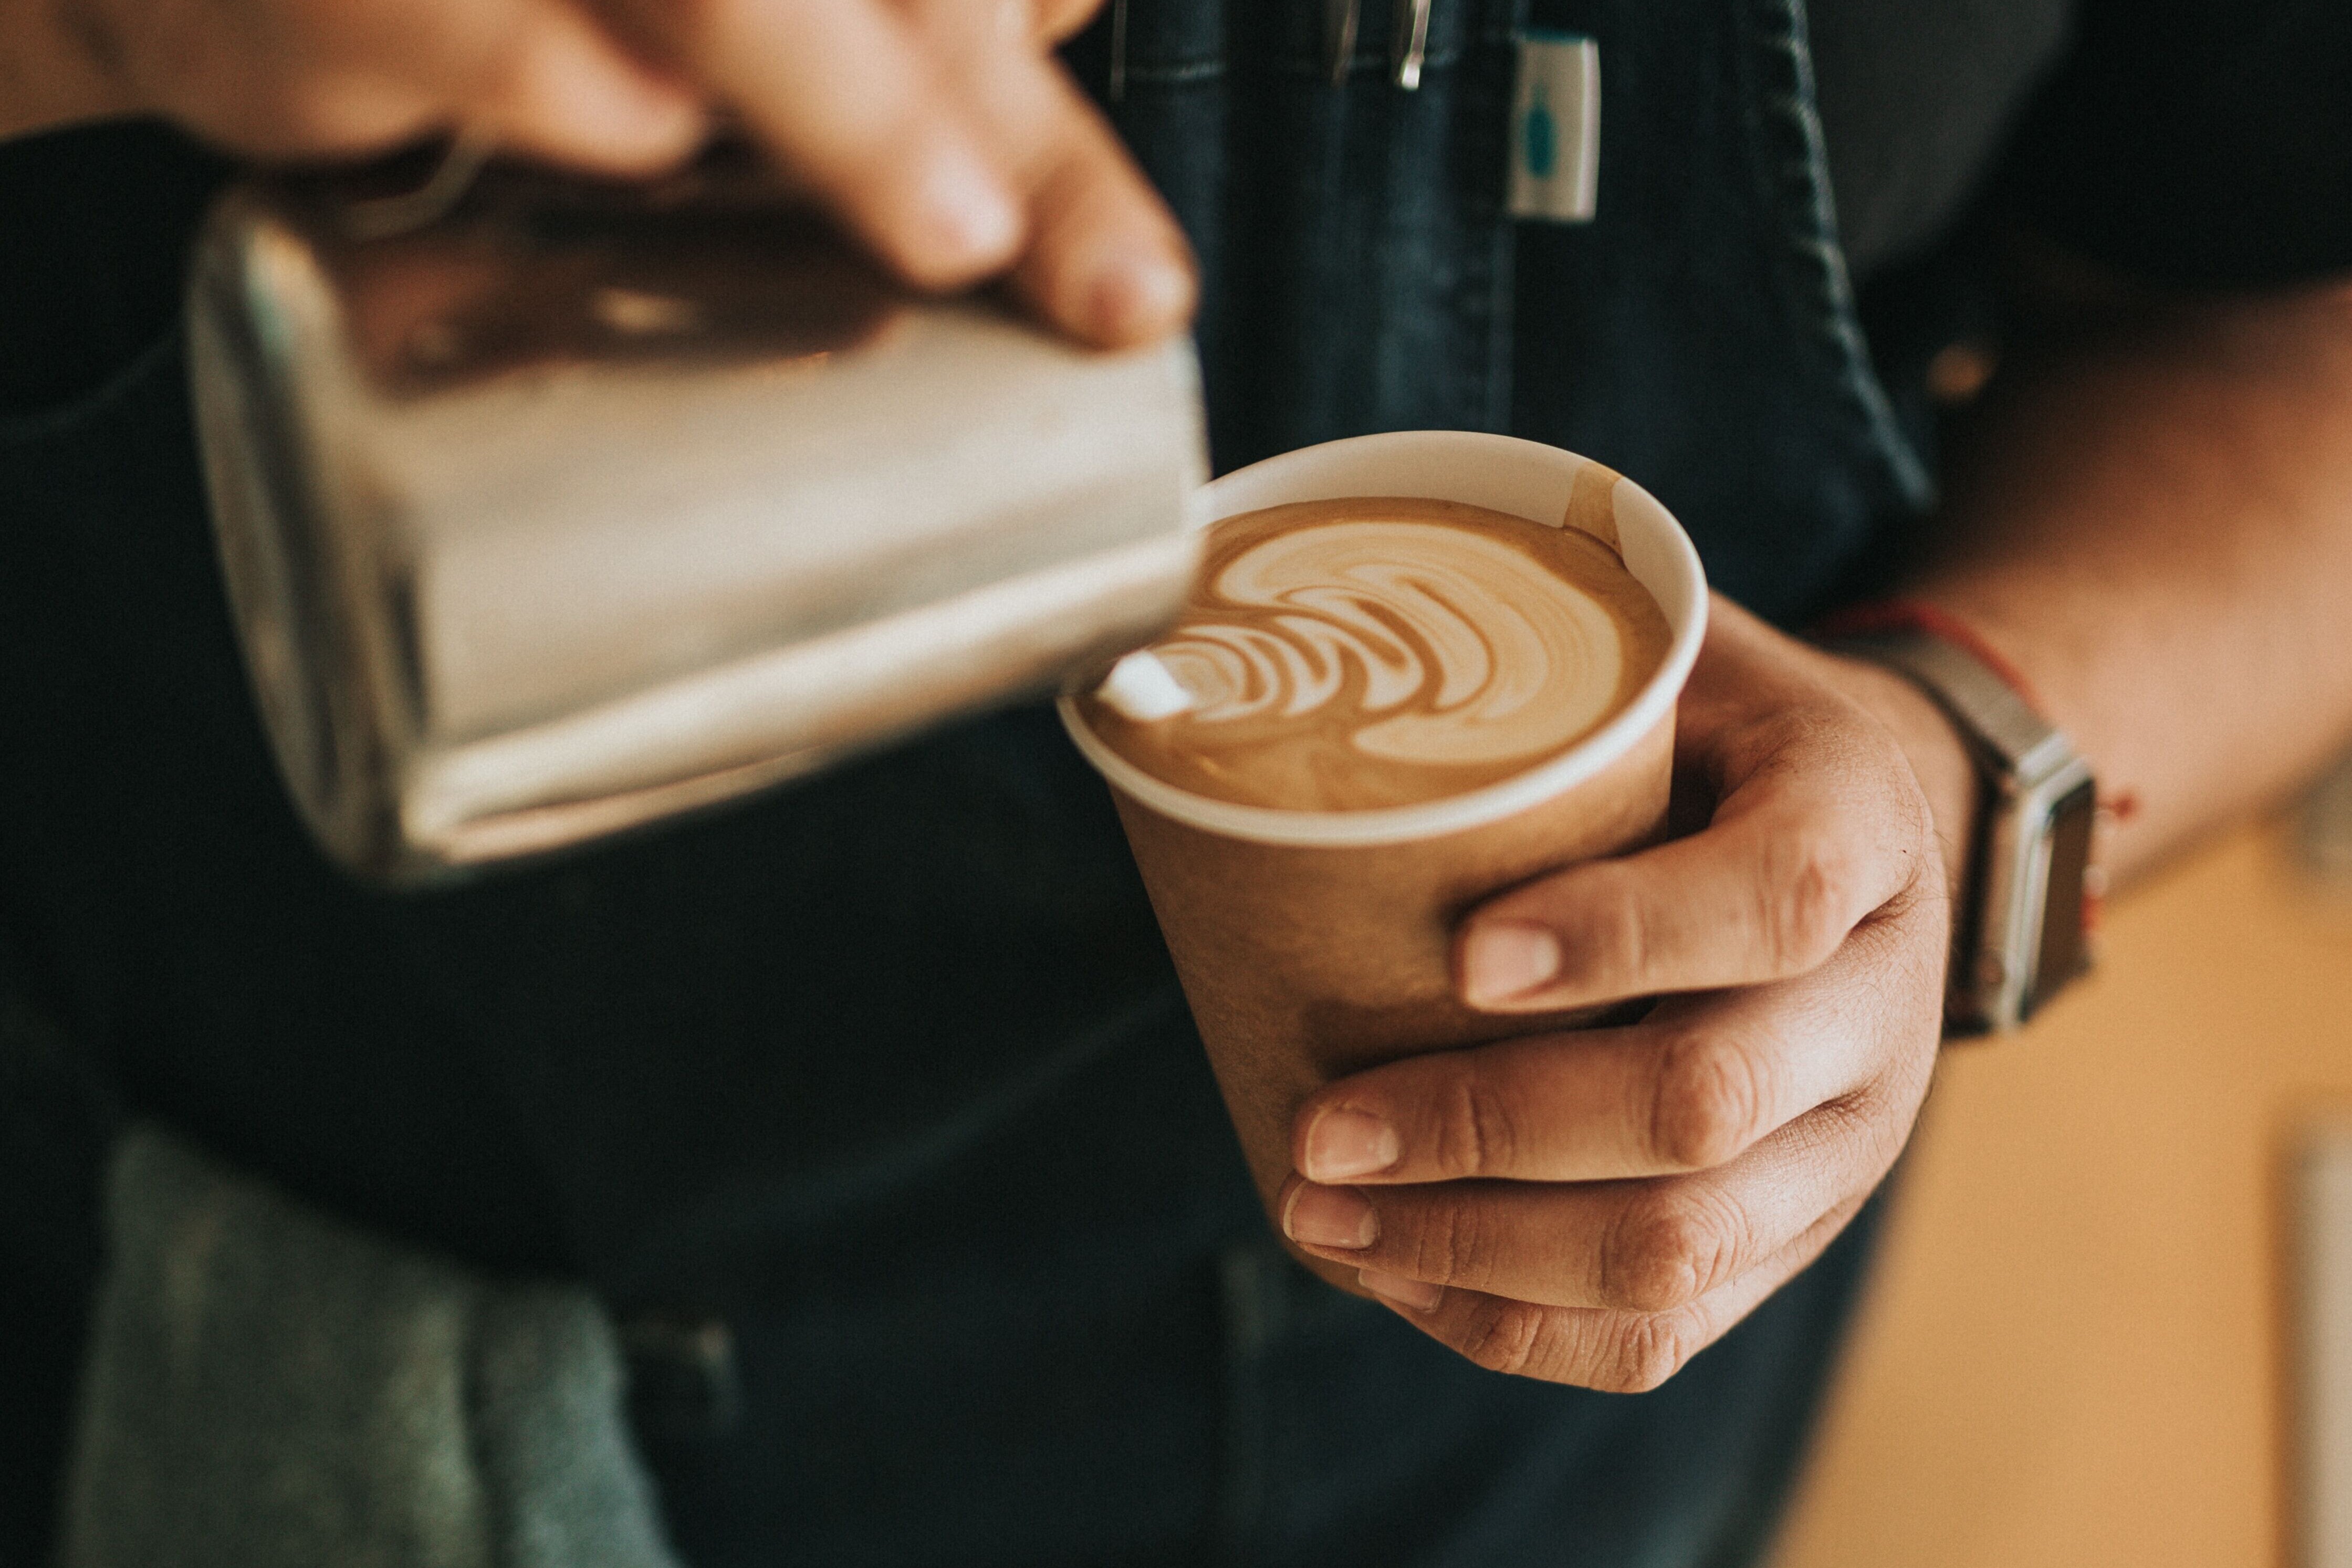 Hands of person holding a milk container being poured into a cup of coffee